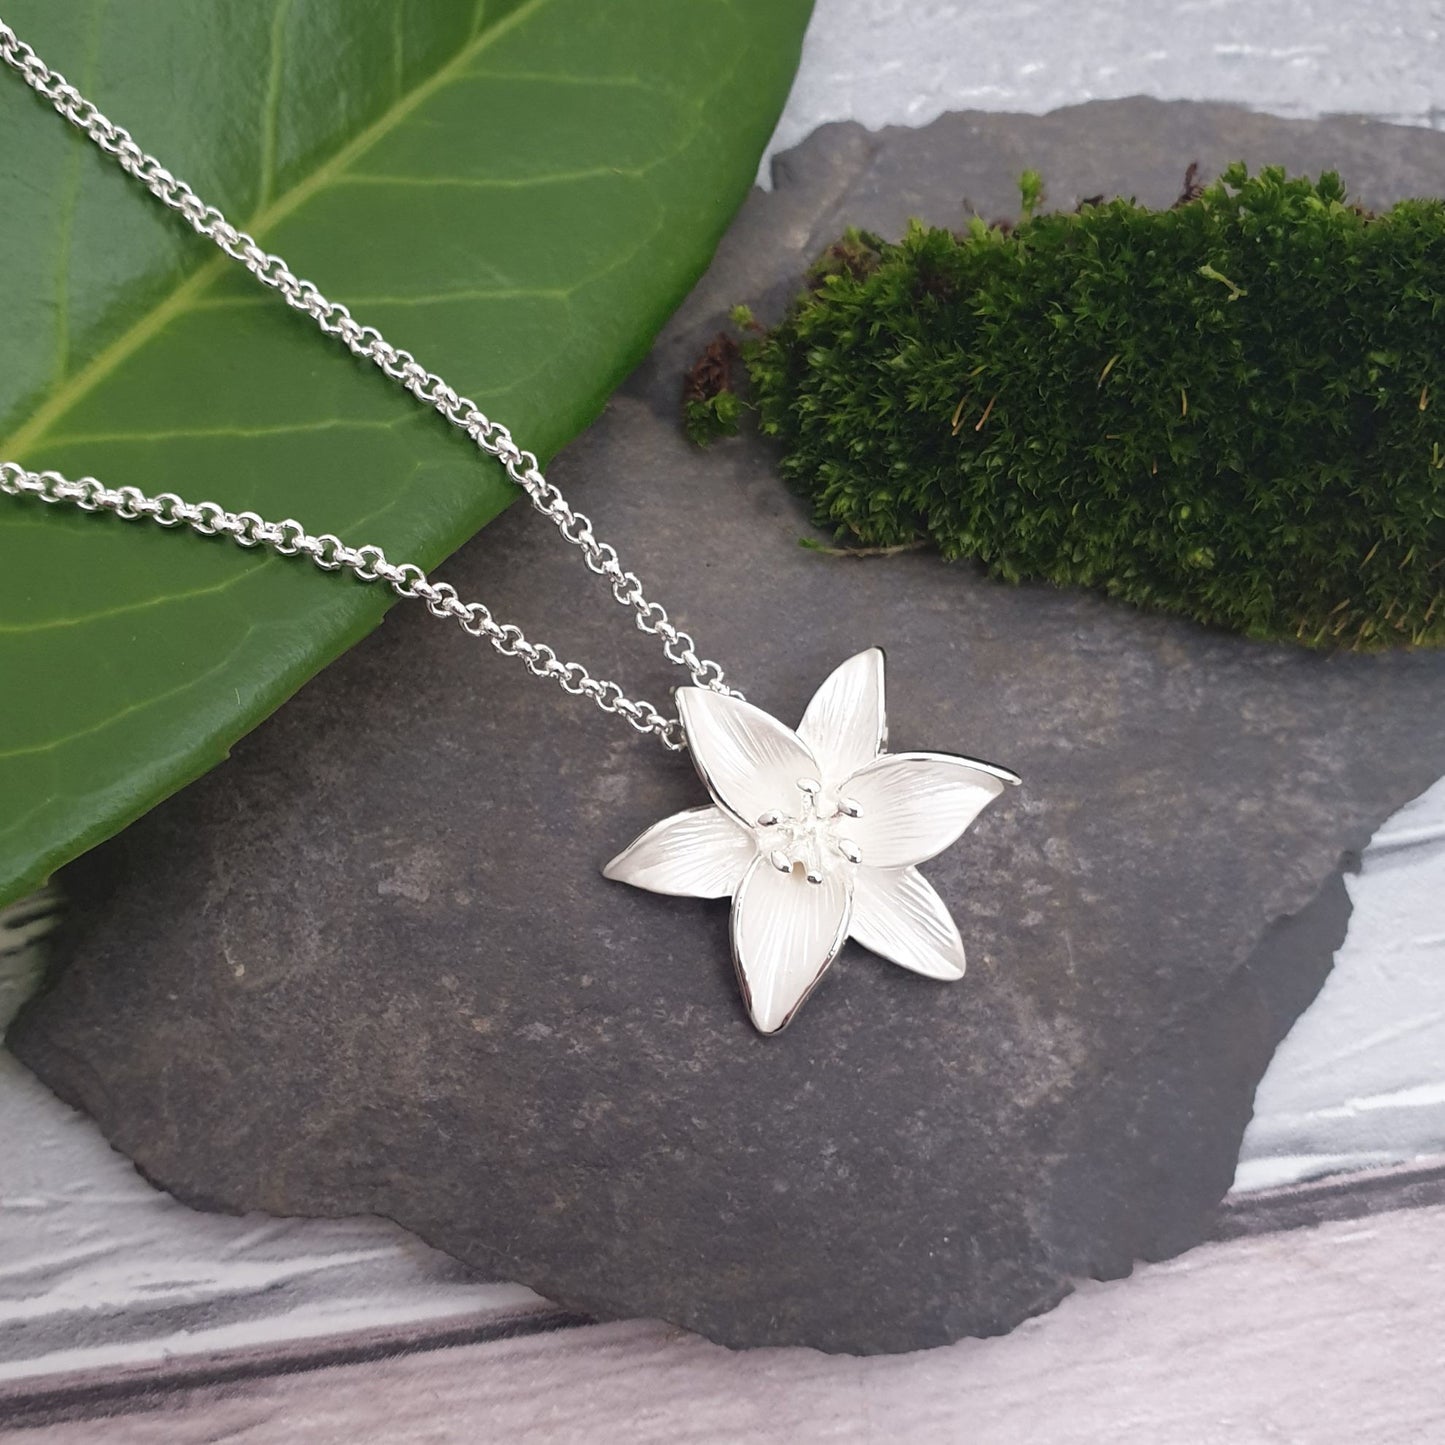 Photo of a single white Madonna Lily as a necklace pendant on a silver chain